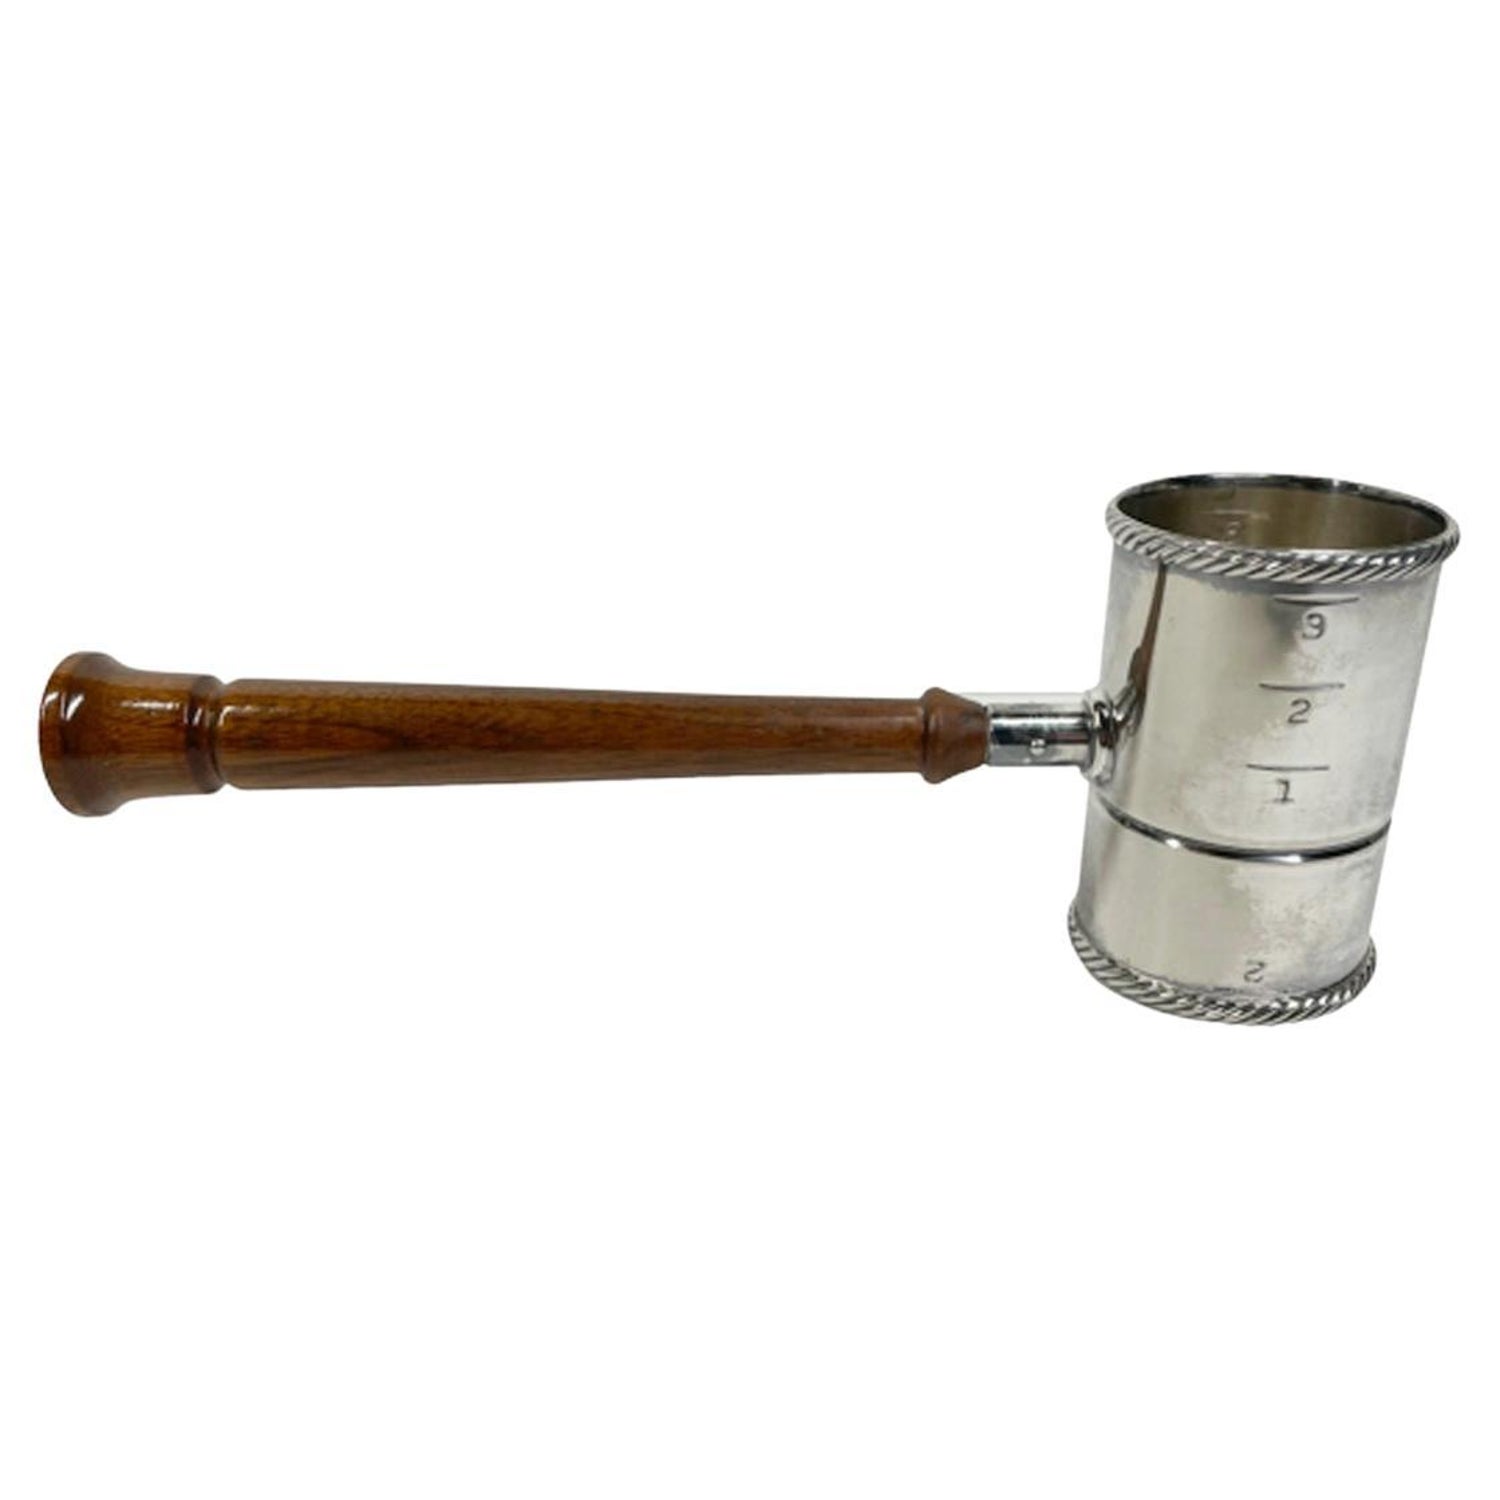 https://a.1stdibscdn.com/mcm-napier-silver-plate-and-turned-wood-double-sided-spirit-measure-jigger-for-sale/f_73712/f_360072221693765073548/f_36007222_1693765073838_bg_processed.jpg?width=1500